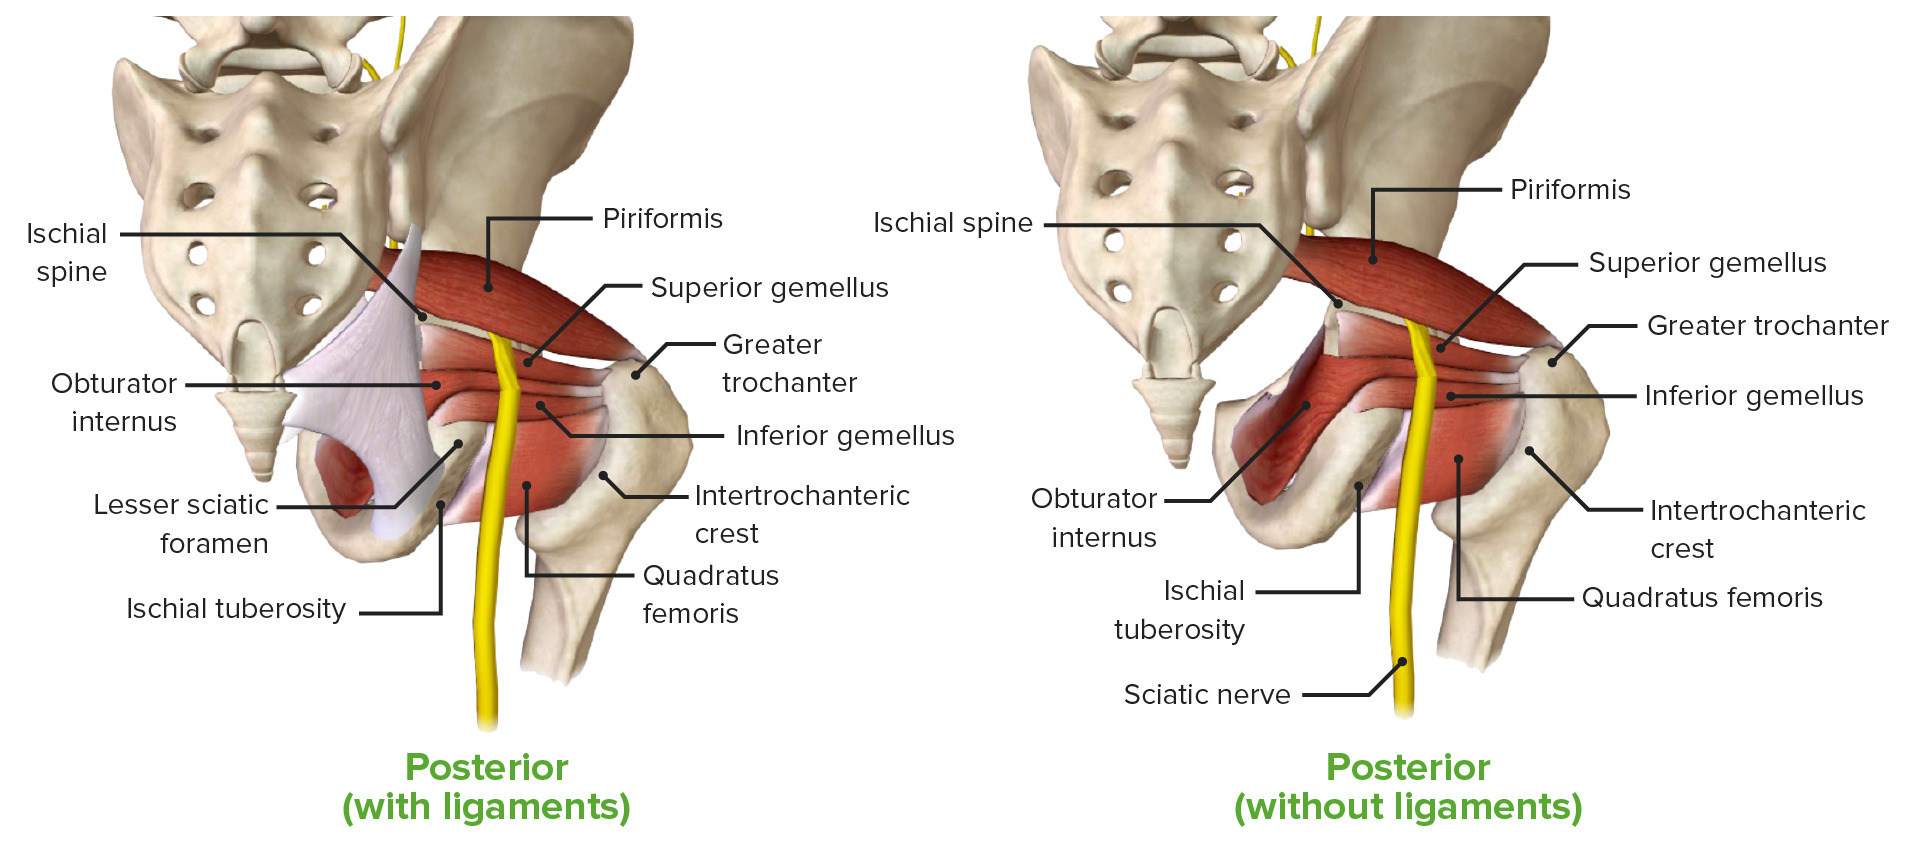 diagram of the gluteal fold